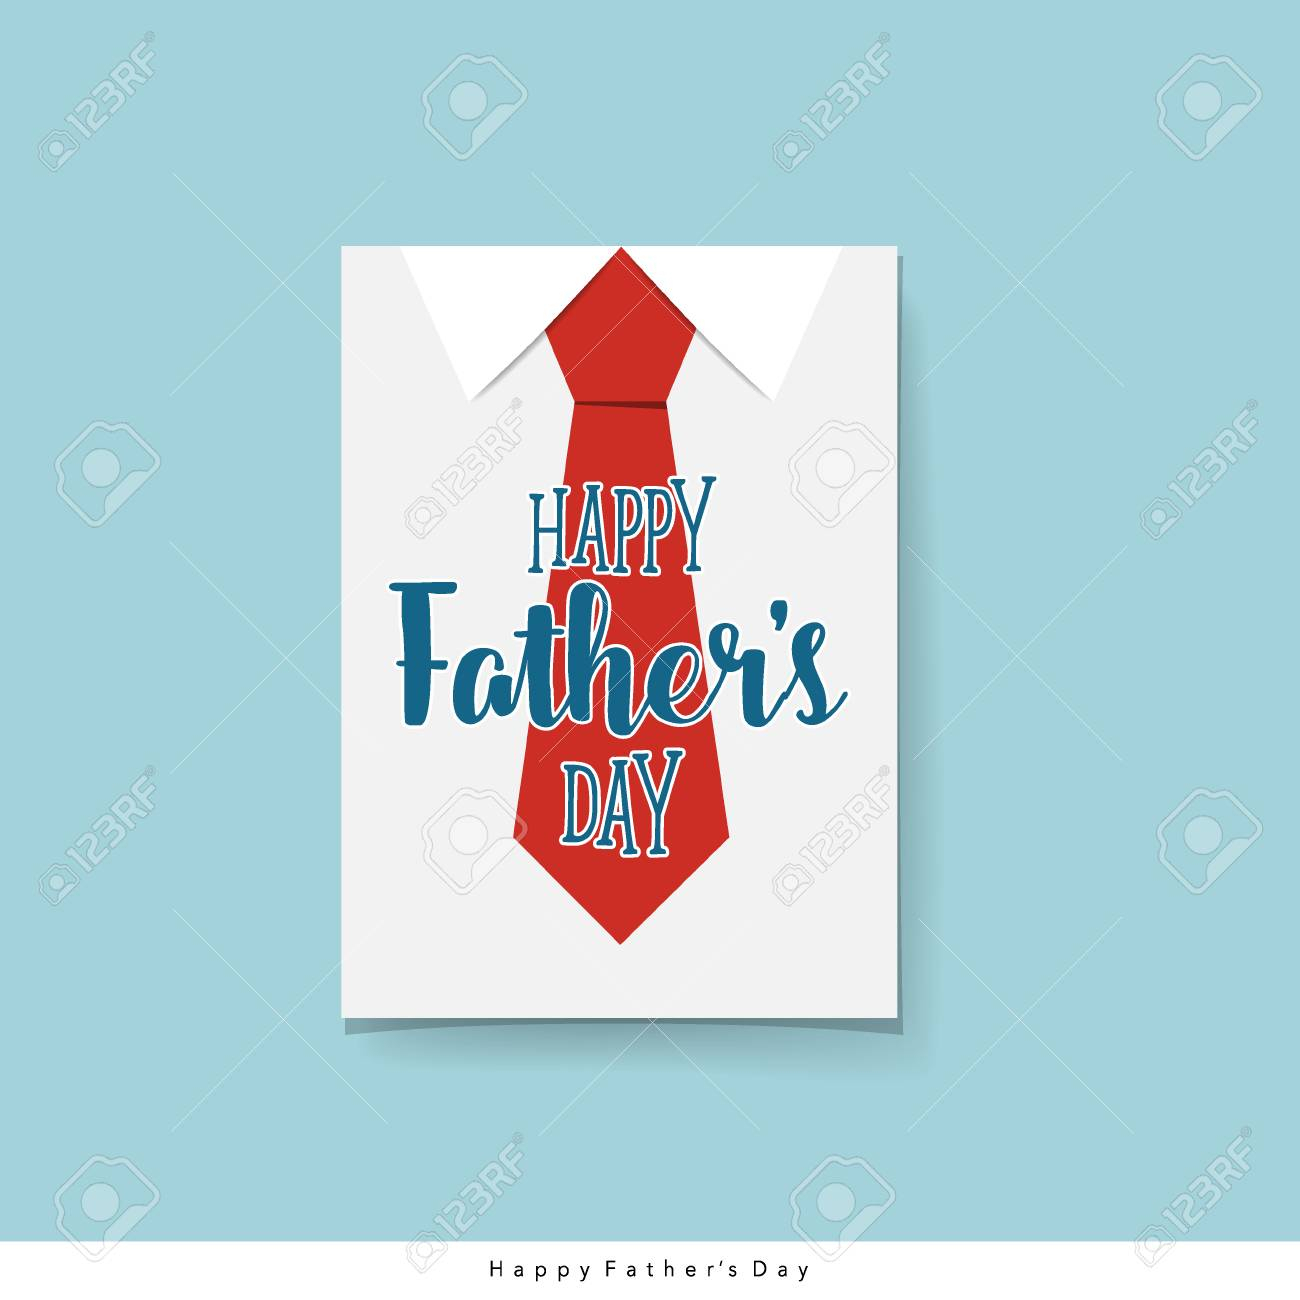 Happy Fathers Day Card Design With Big Tie. Vector Illustration. For Fathers Day Card Template